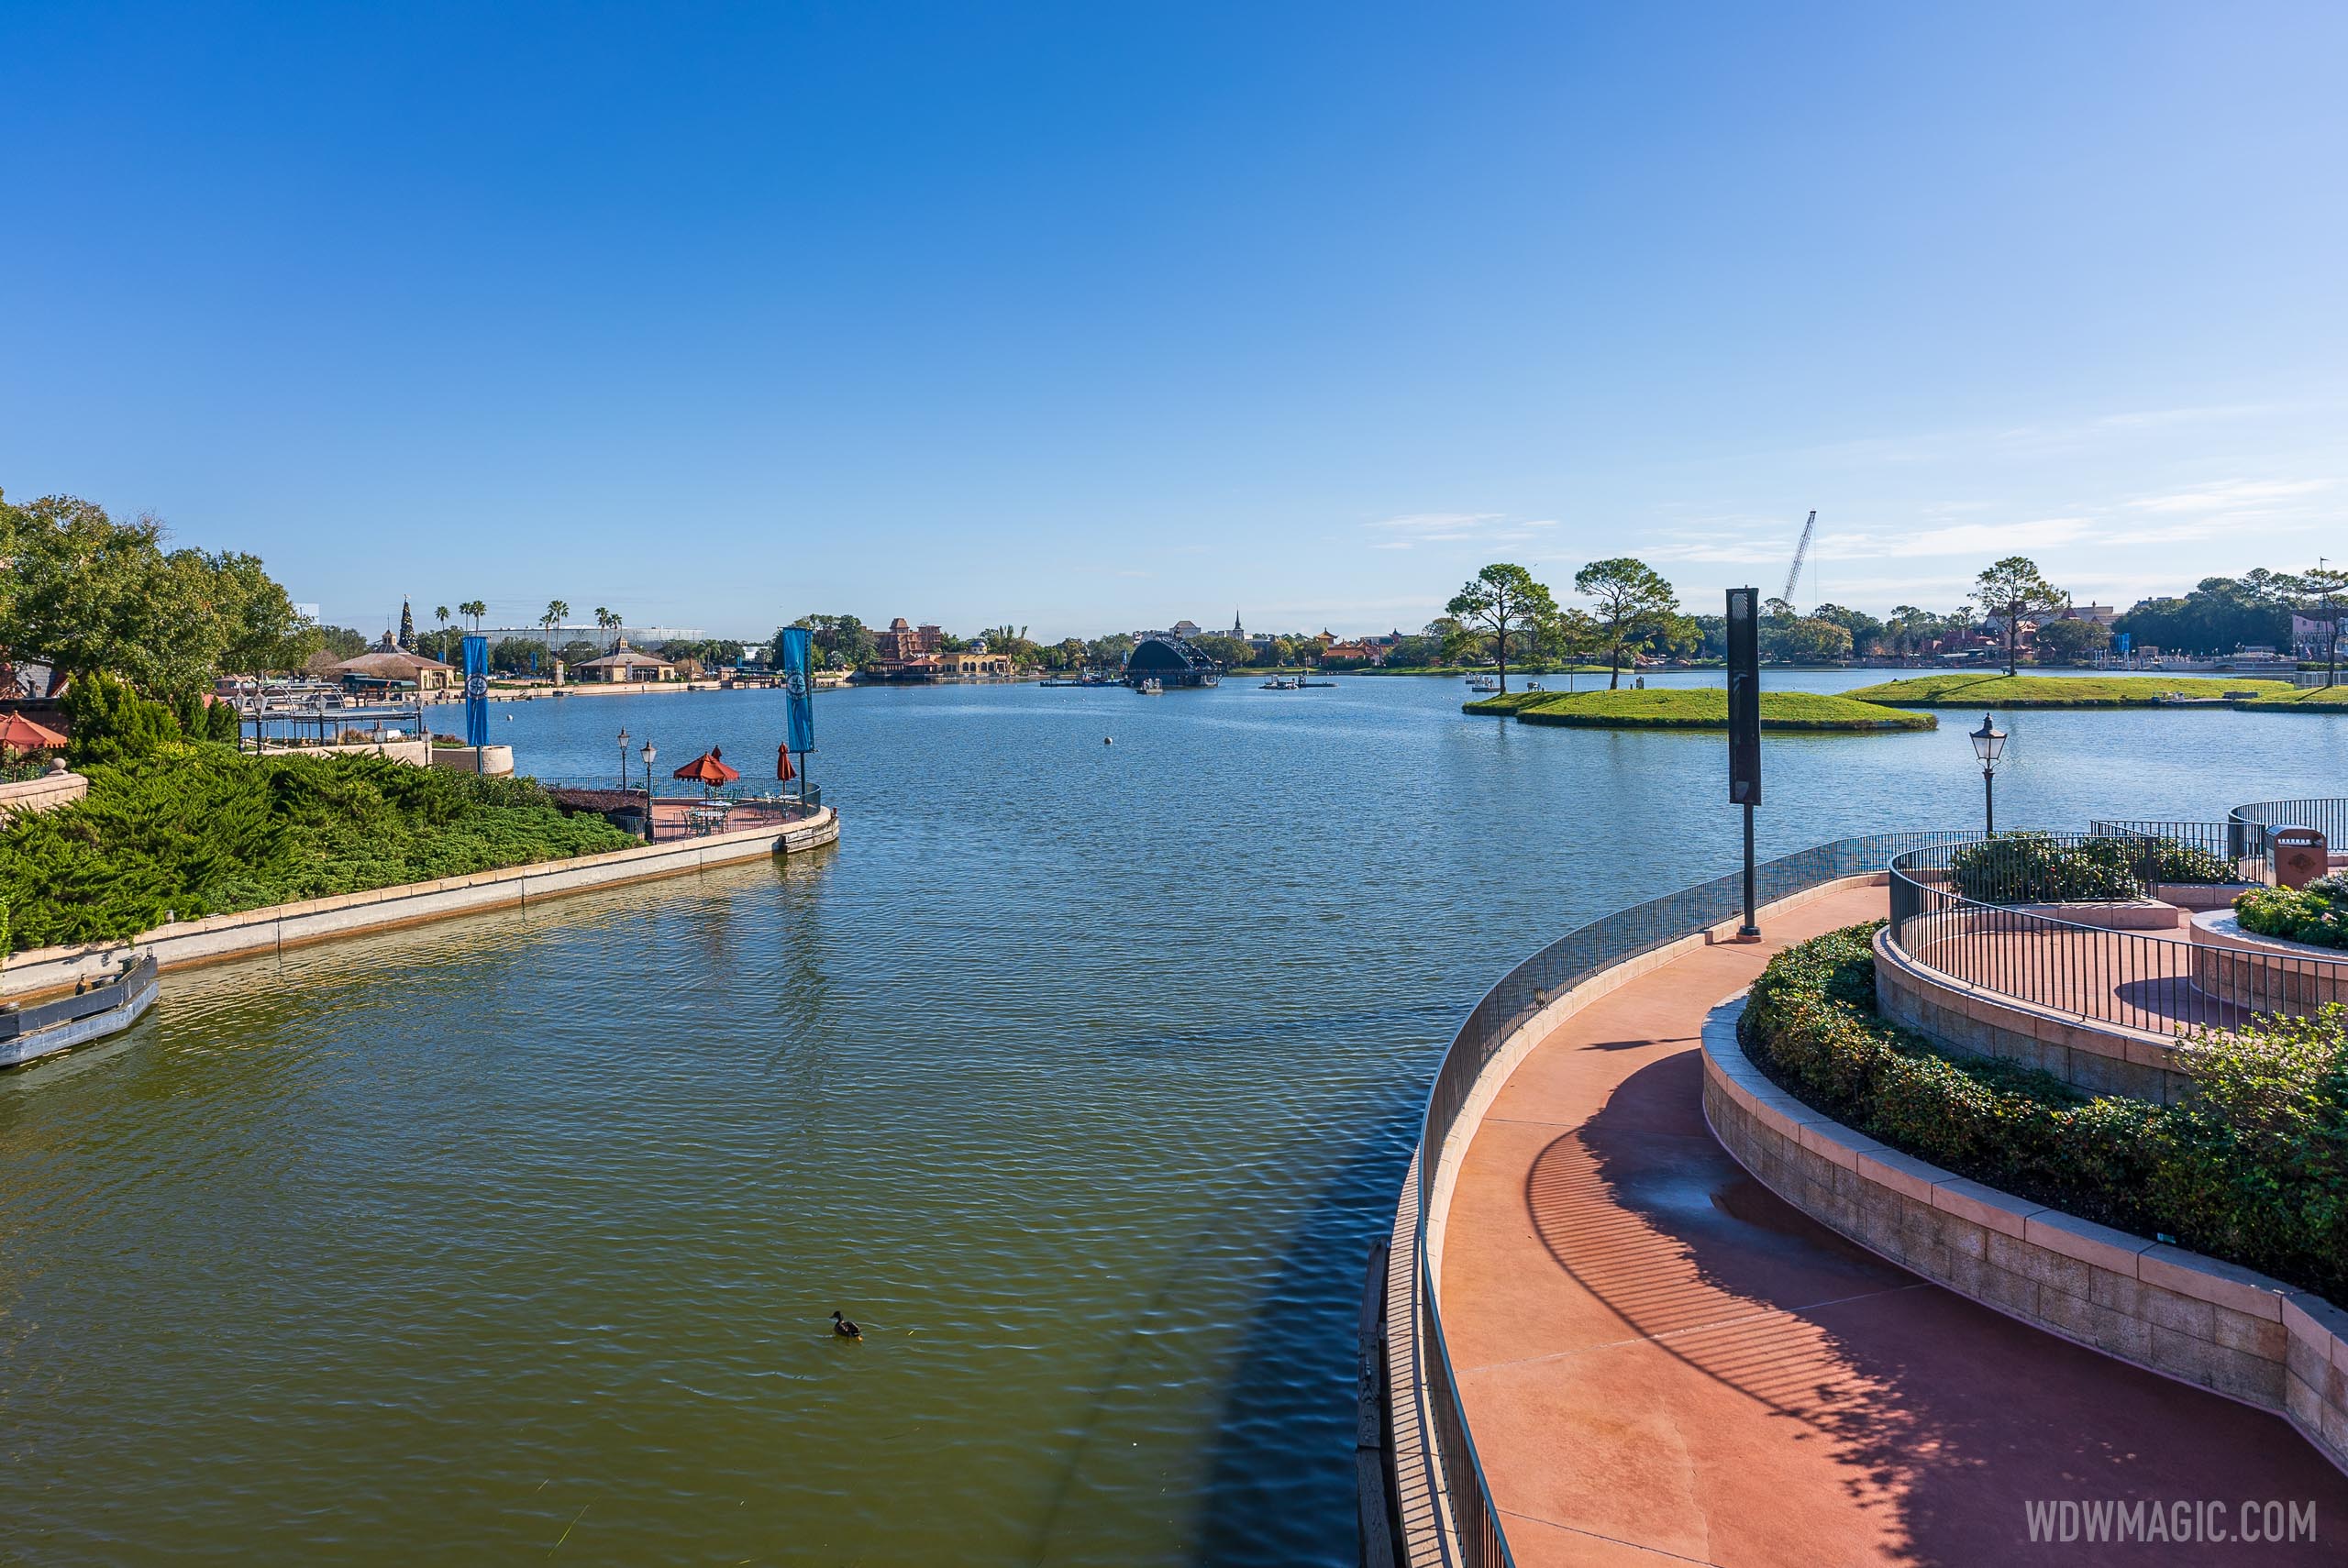 ‘Natural View’ lens offers a realistic impression of the size of the Harmonious show barges in World Showcase Lagoon